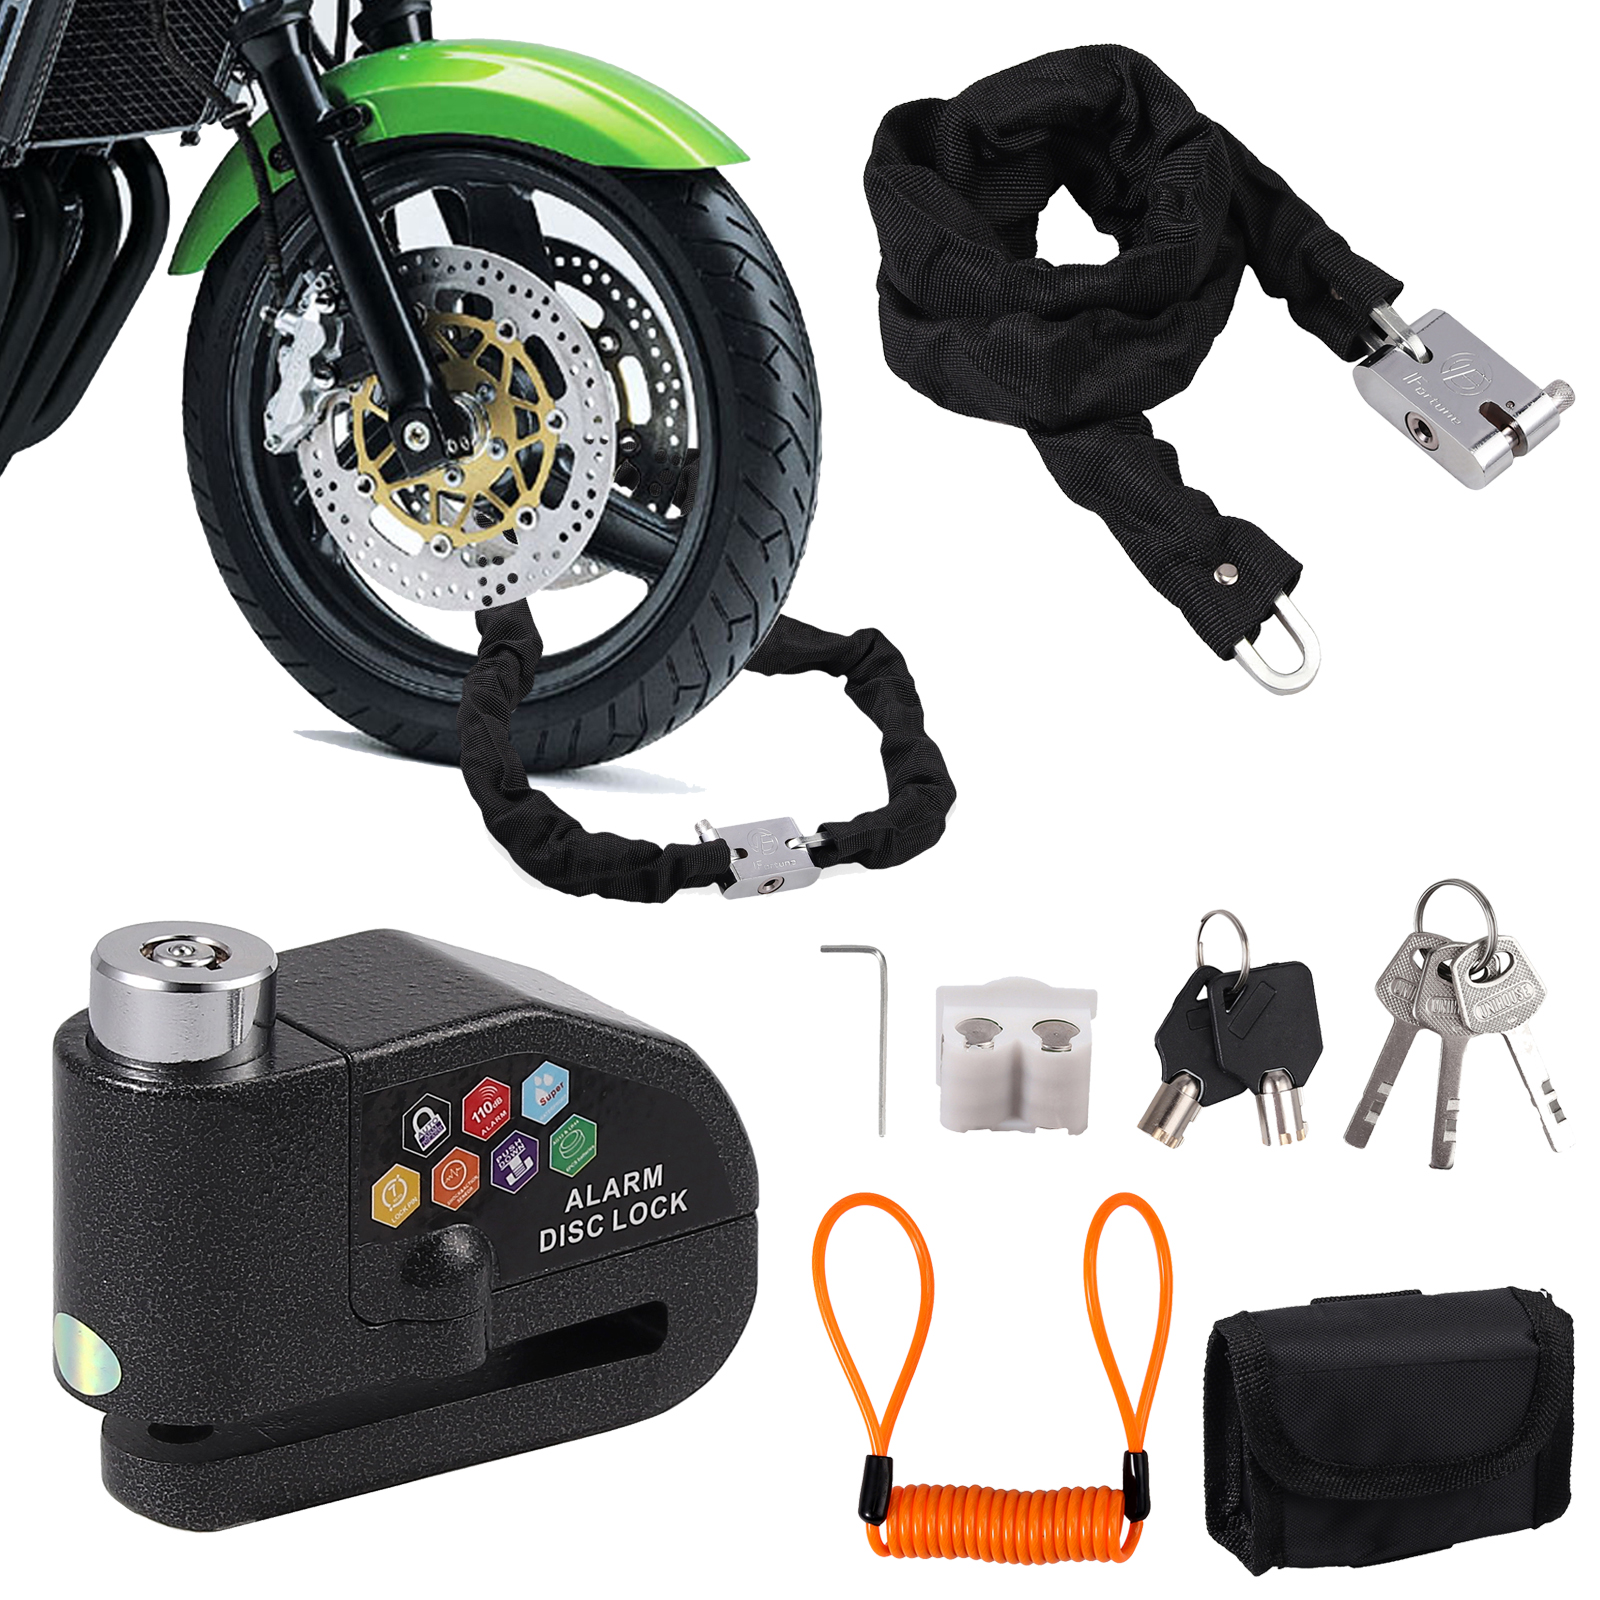 1.2M Anti Theft Chain Disc Lock Padlock For Motorcycle Bike Bicycle Scooter  ^